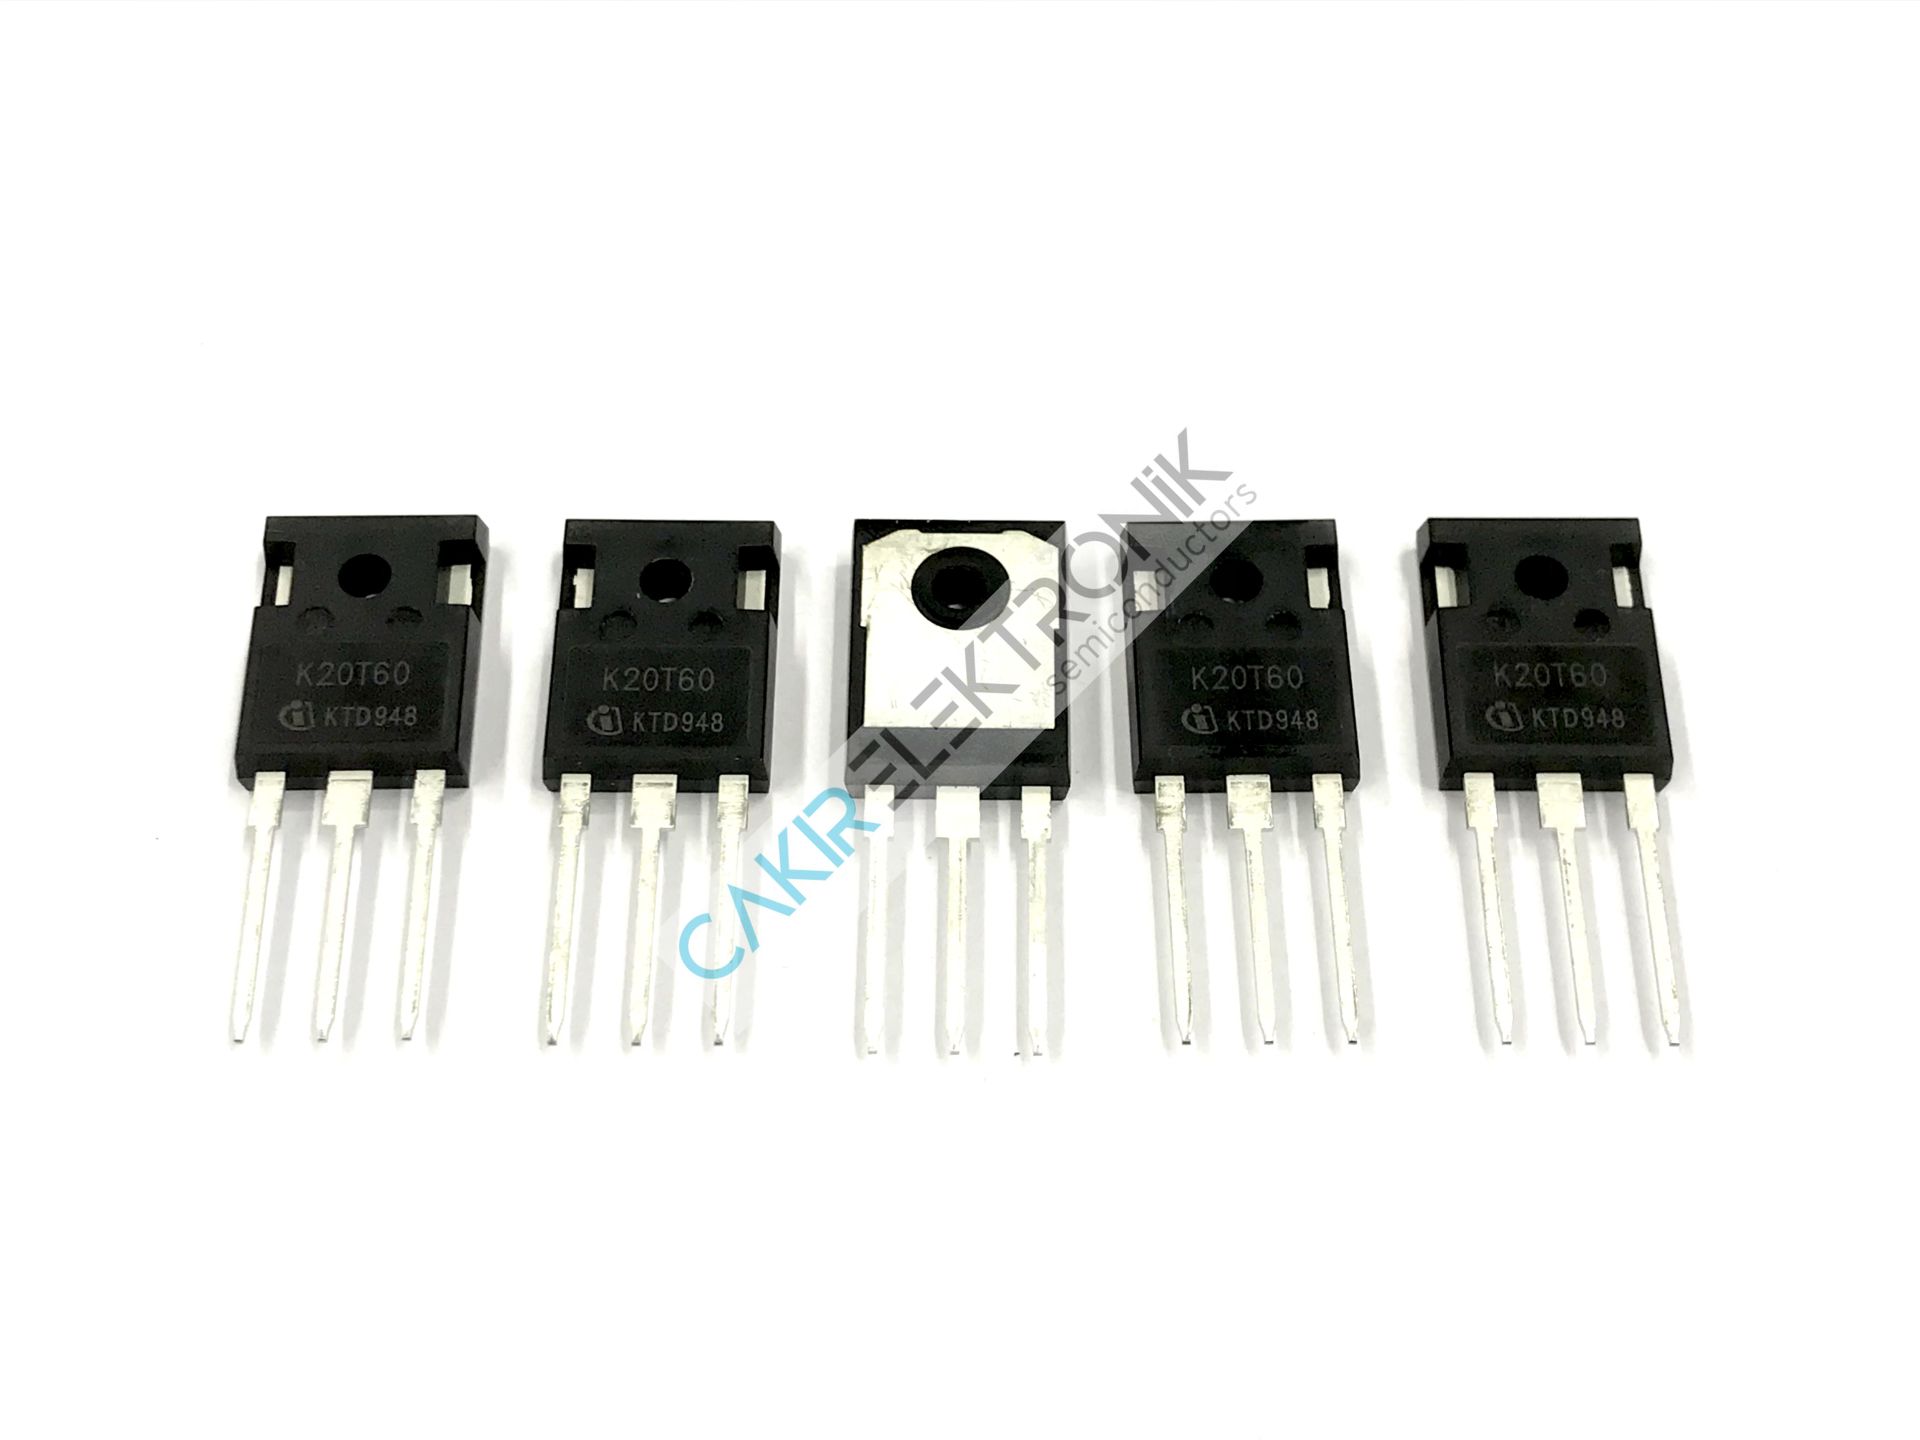 K20T60 (IKW20N60T) - 20T60 - 20N60 - TO-247 20A 600V IGBT TRANSISTOR